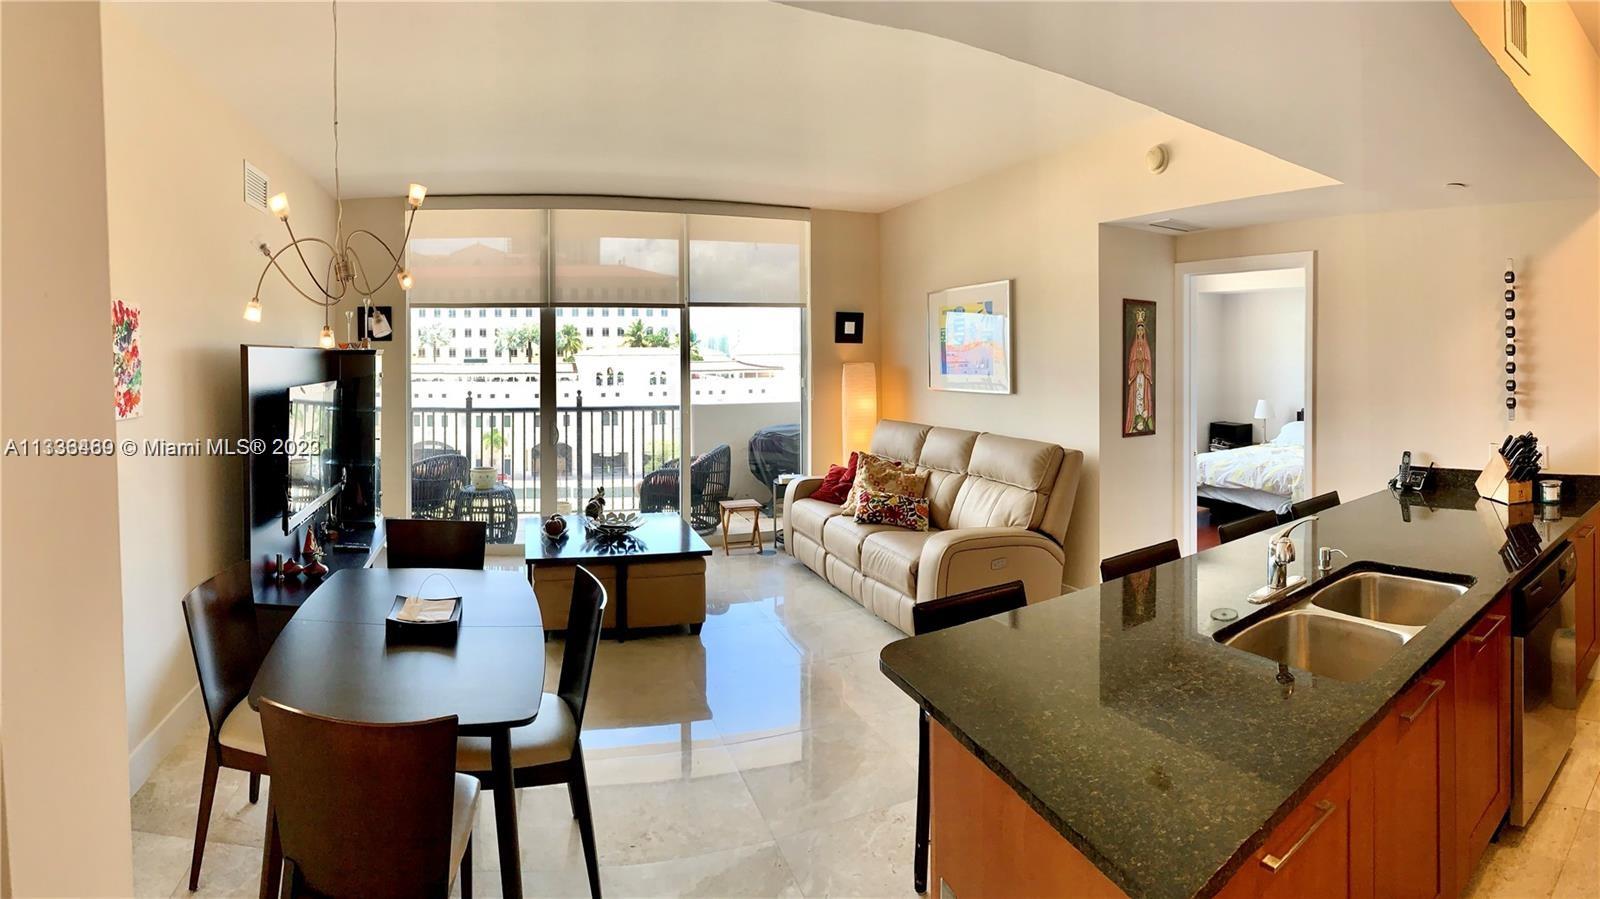 Beautiful, updated 2 Bed/ 2 Bath "FURNISHED" apartment located blocks away from the University of Miami, Downtown Gables and steps away from Shops at Merrick Park, restaurants, supermarkets and the Miami metro rail. This amazing apartment is fully furnished, and it offers 1 parking space, 24 hr. security, pool and fitness center. It is centrally located with easy access to all you need. Only bring your clothes and personal items. A must see!